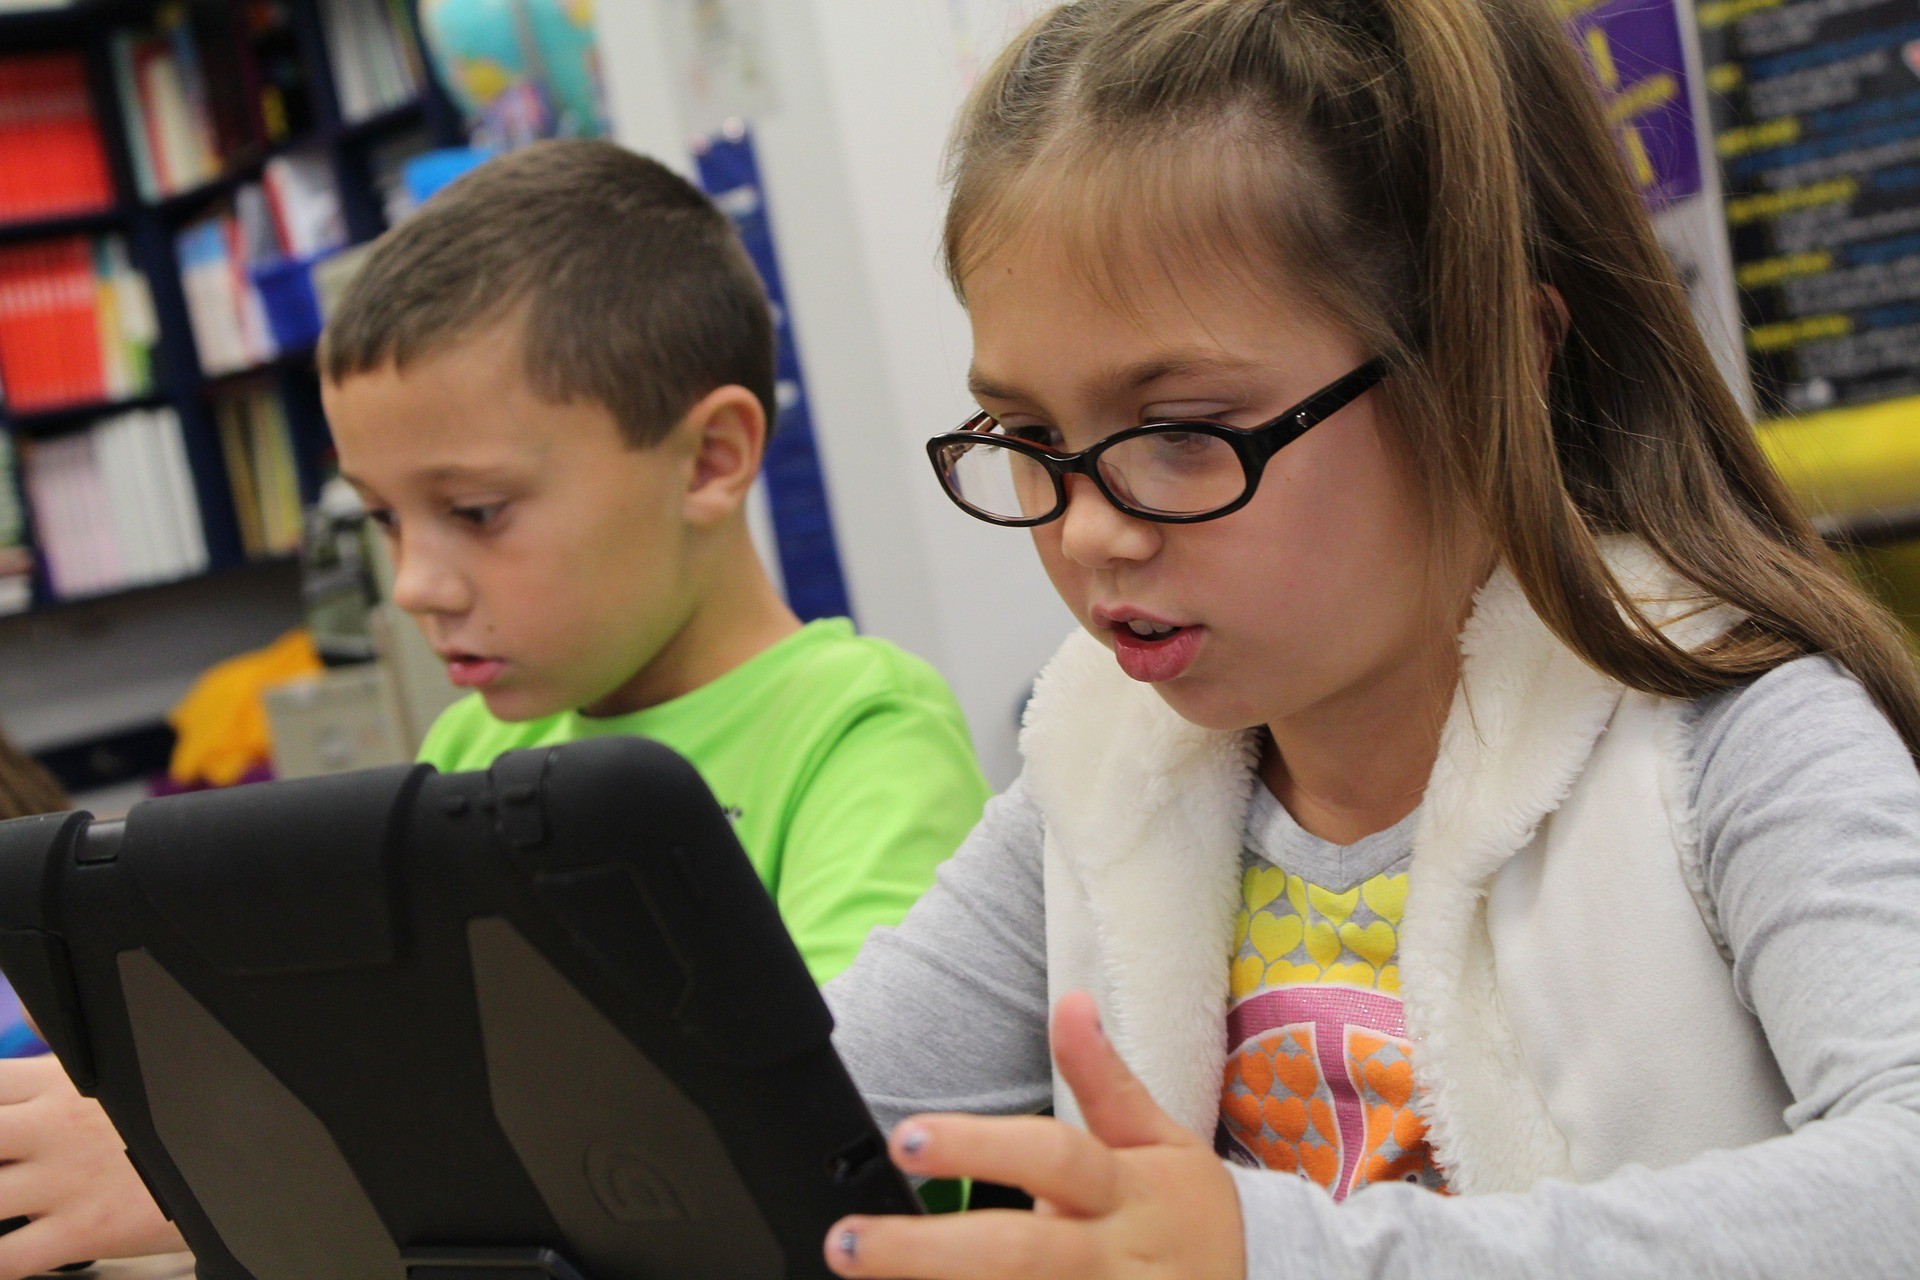 Two children work on tablets in a classroom.